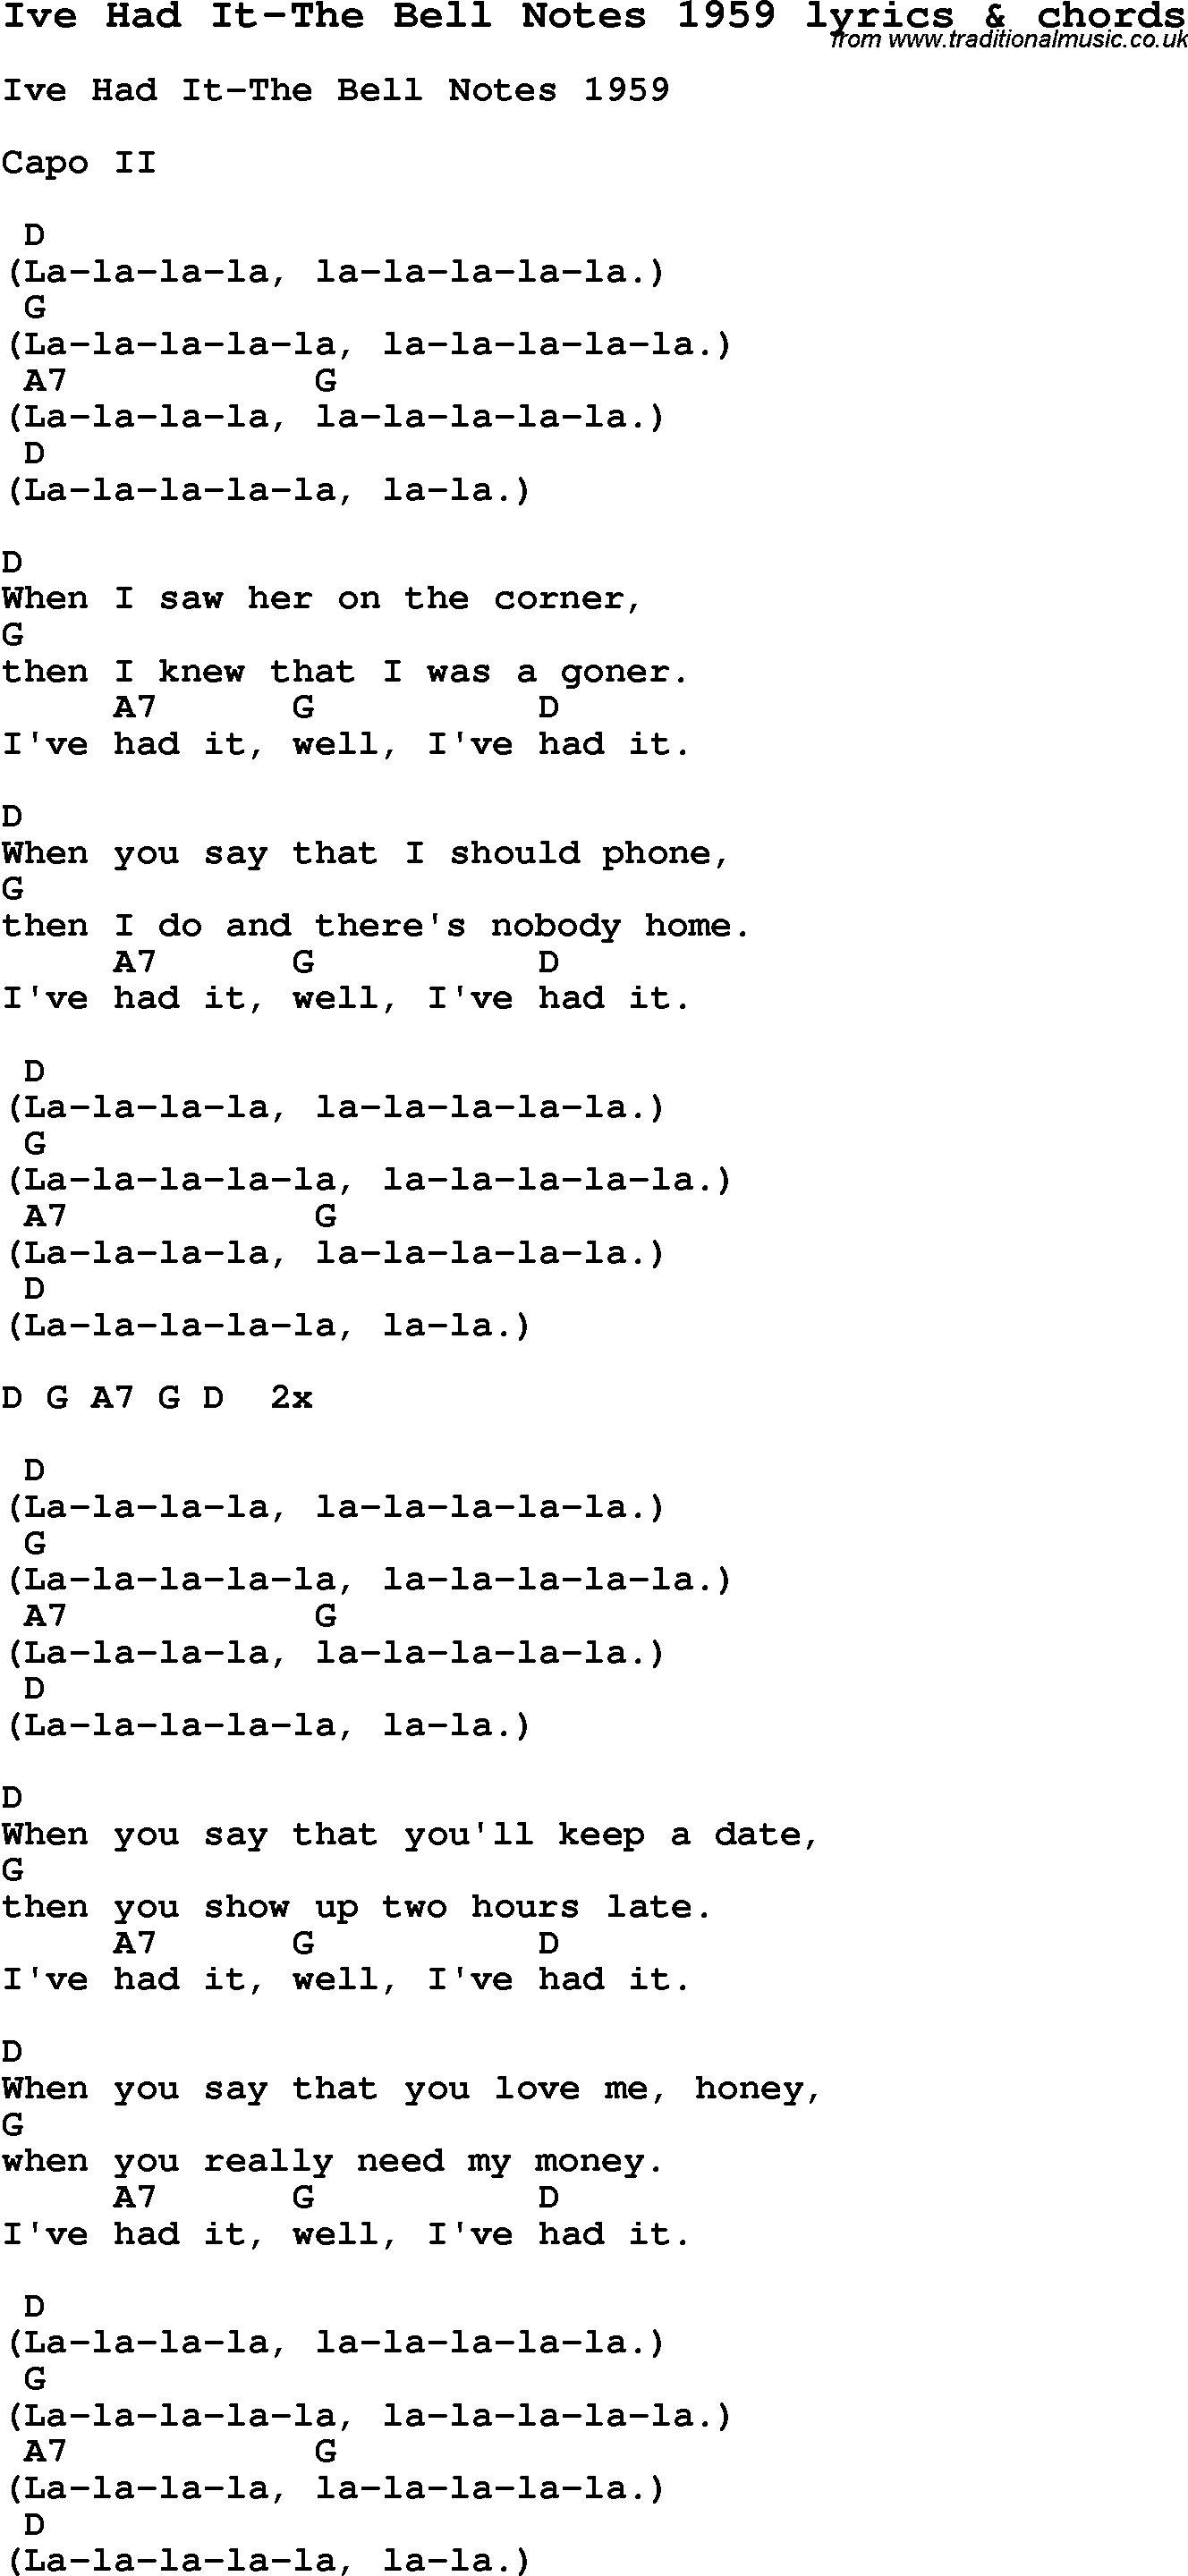 Love Song Lyrics for: Ive Had It-The Bell Notes 1959 with chords for Ukulele, Guitar Banjo etc.